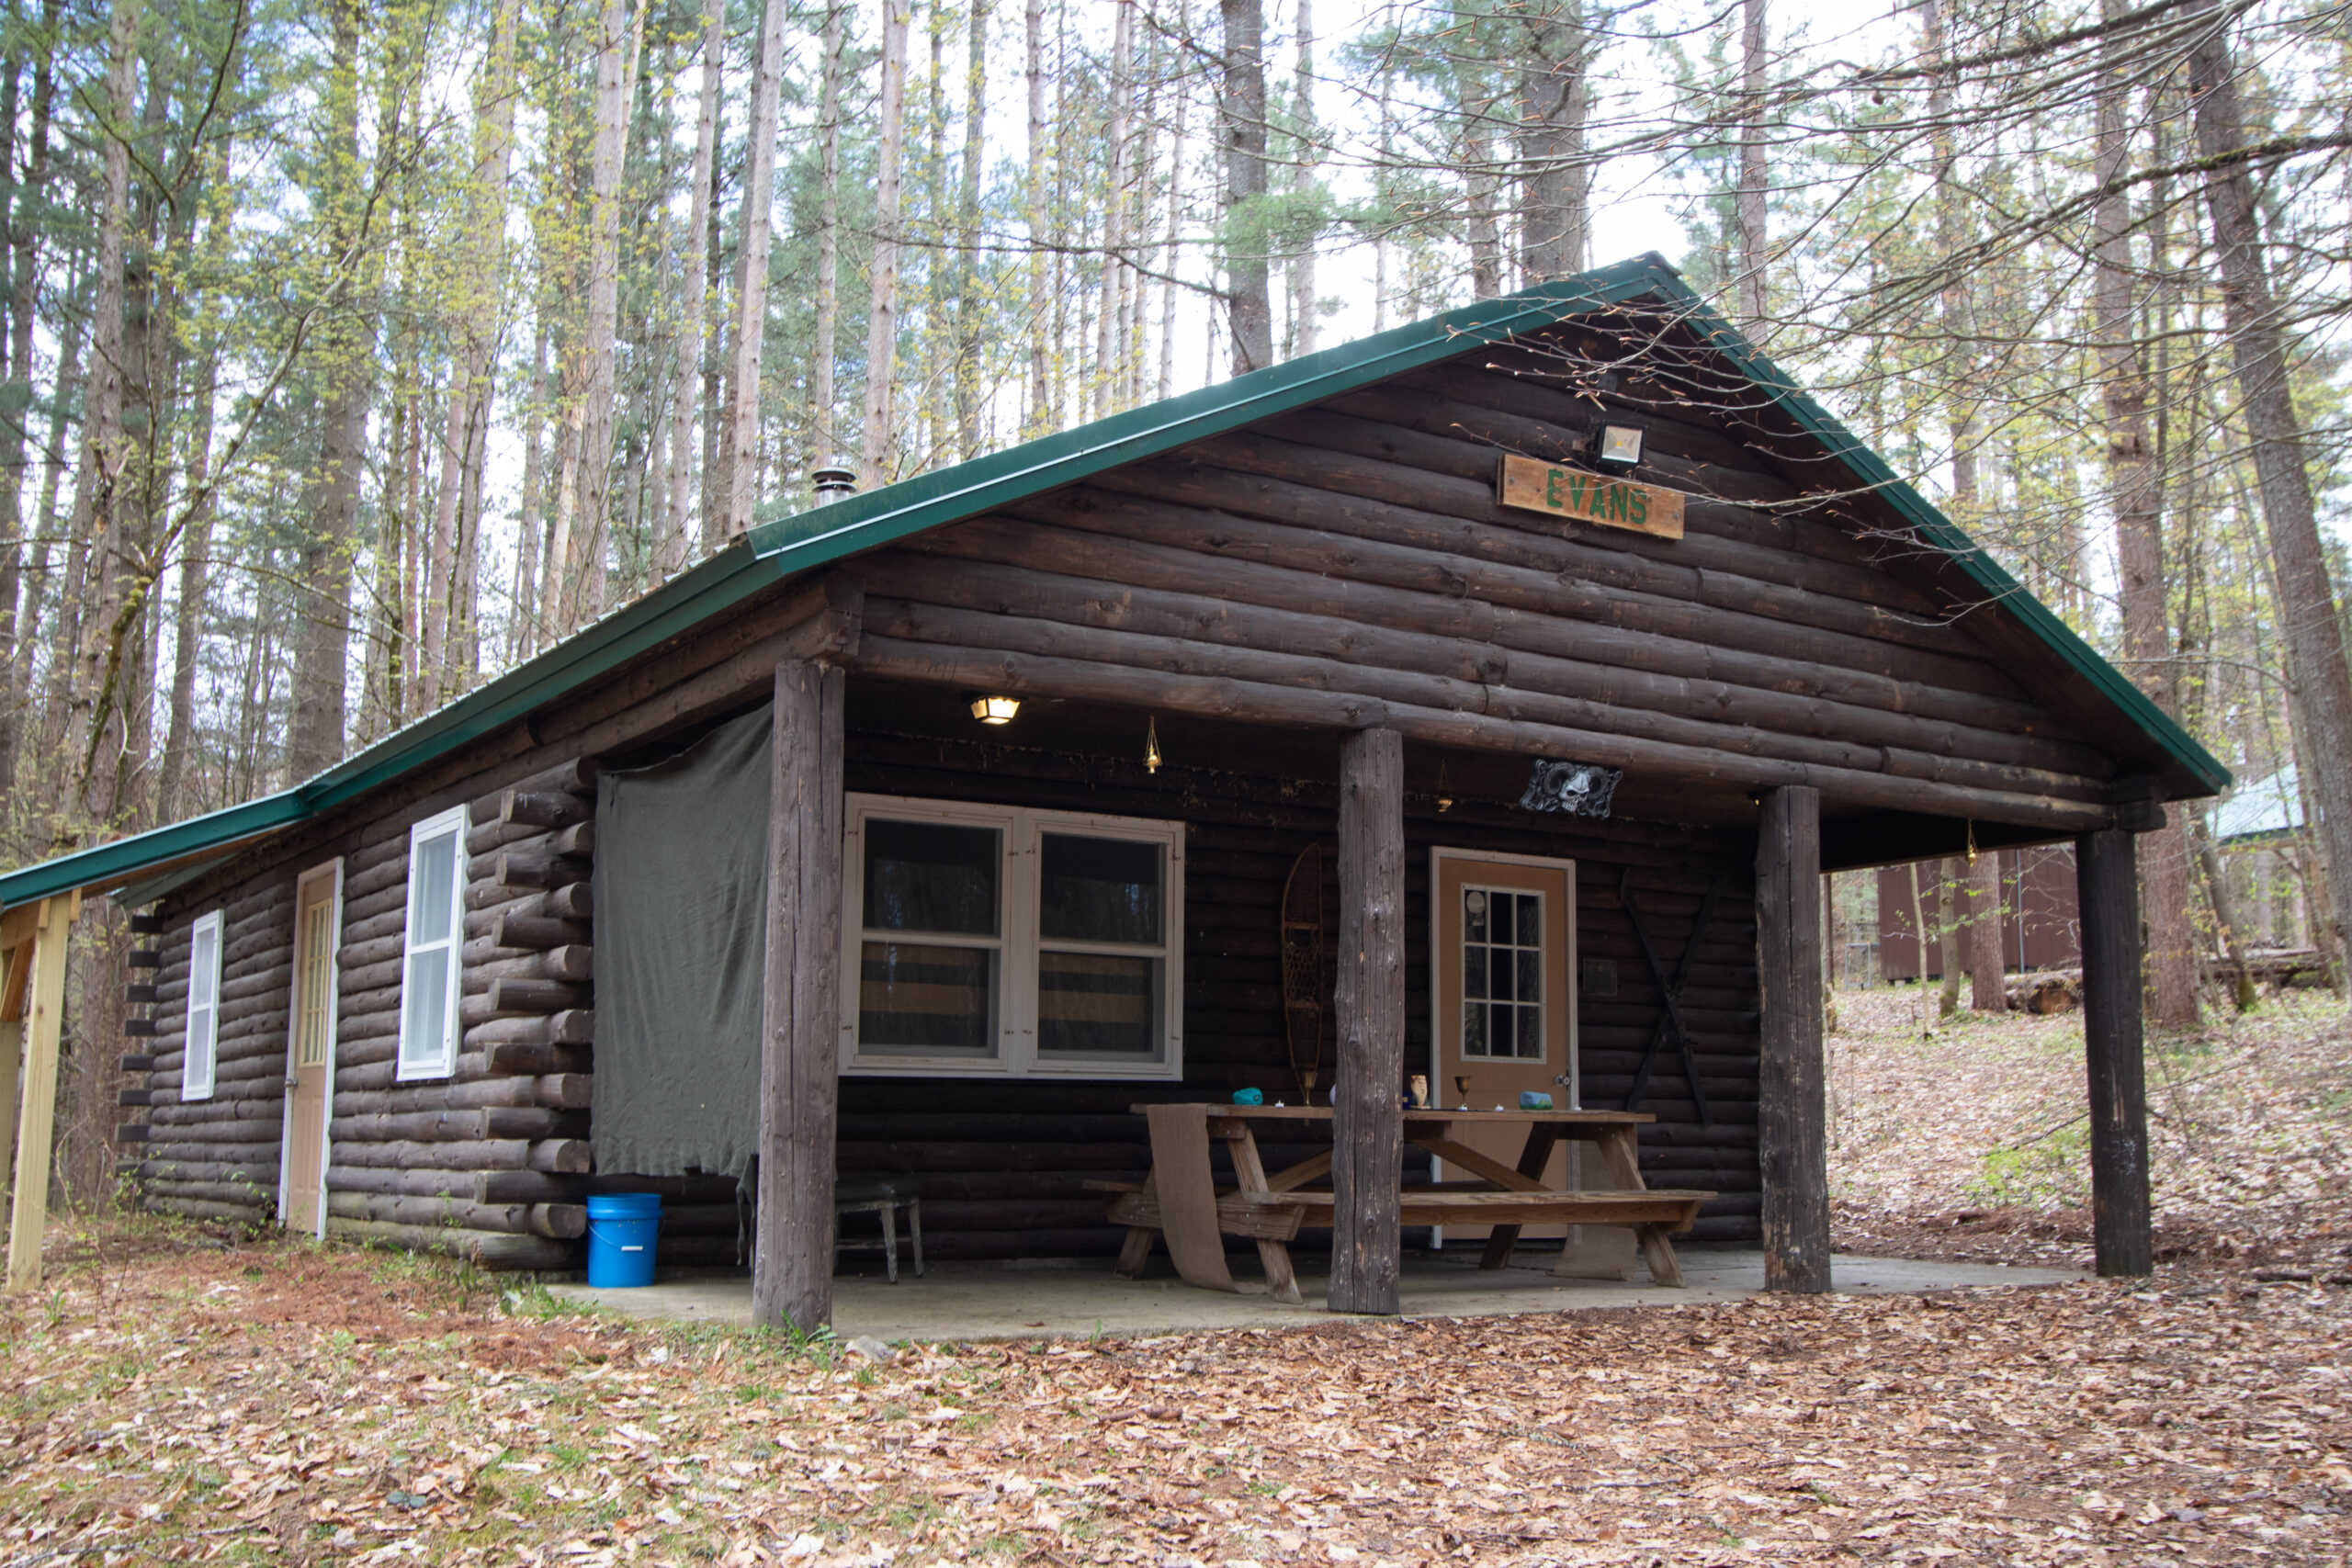 We have indoor sleeping for 32 people between the Evans and Harden cabins. These cabins offer heated sleeping space with electric plugs. Beds in these cabins are first-come, first-served.